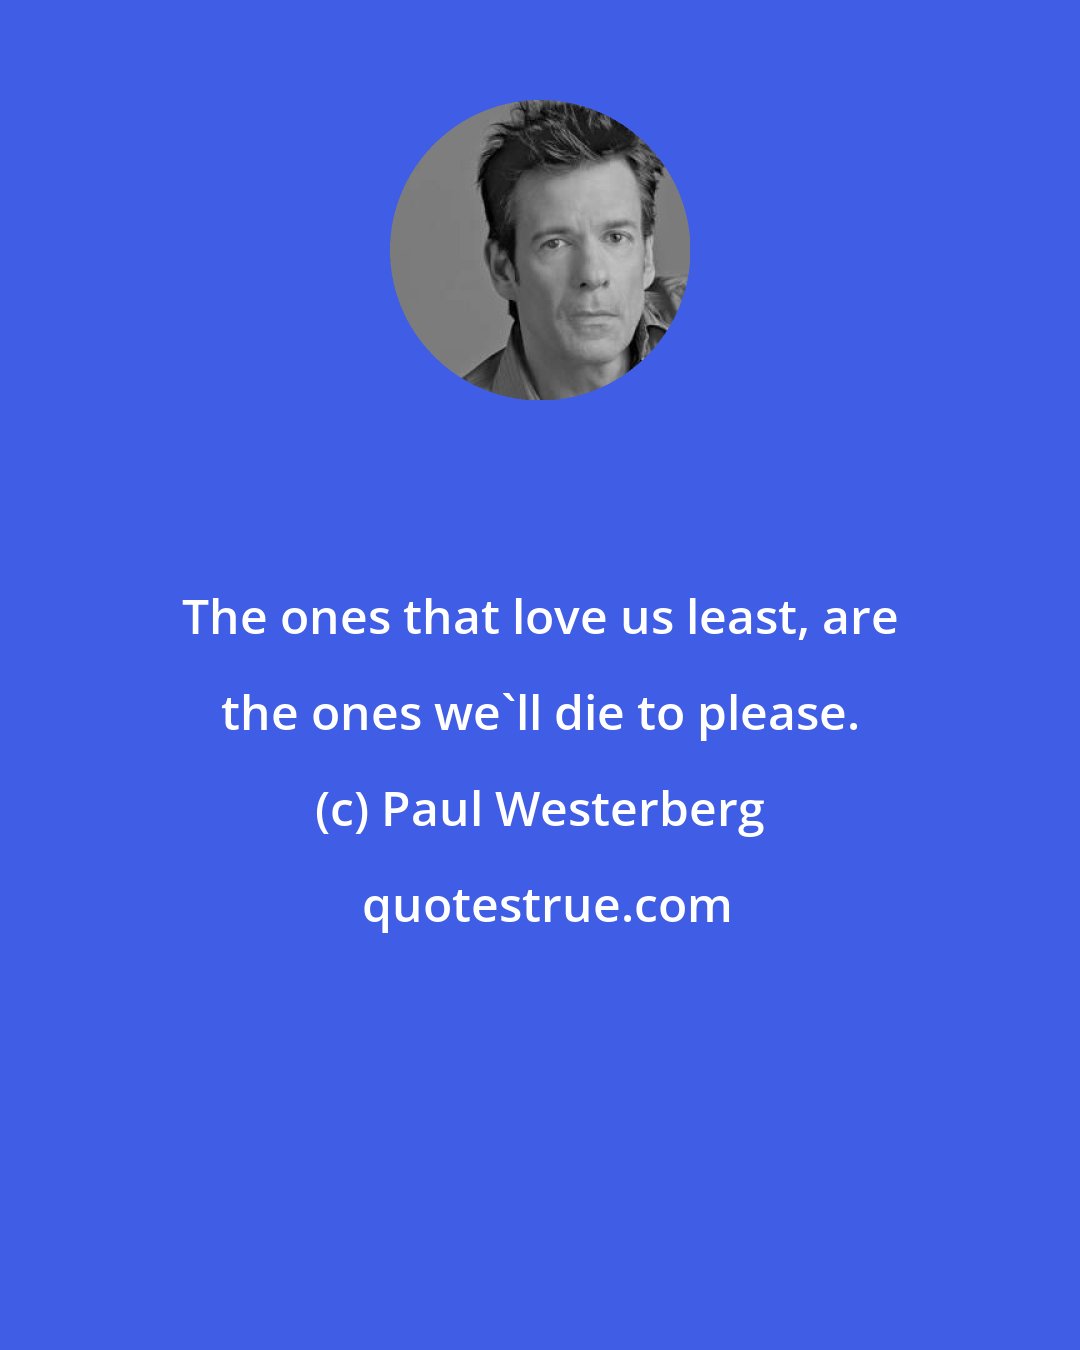 Paul Westerberg: The ones that love us least, are the ones we'll die to please.